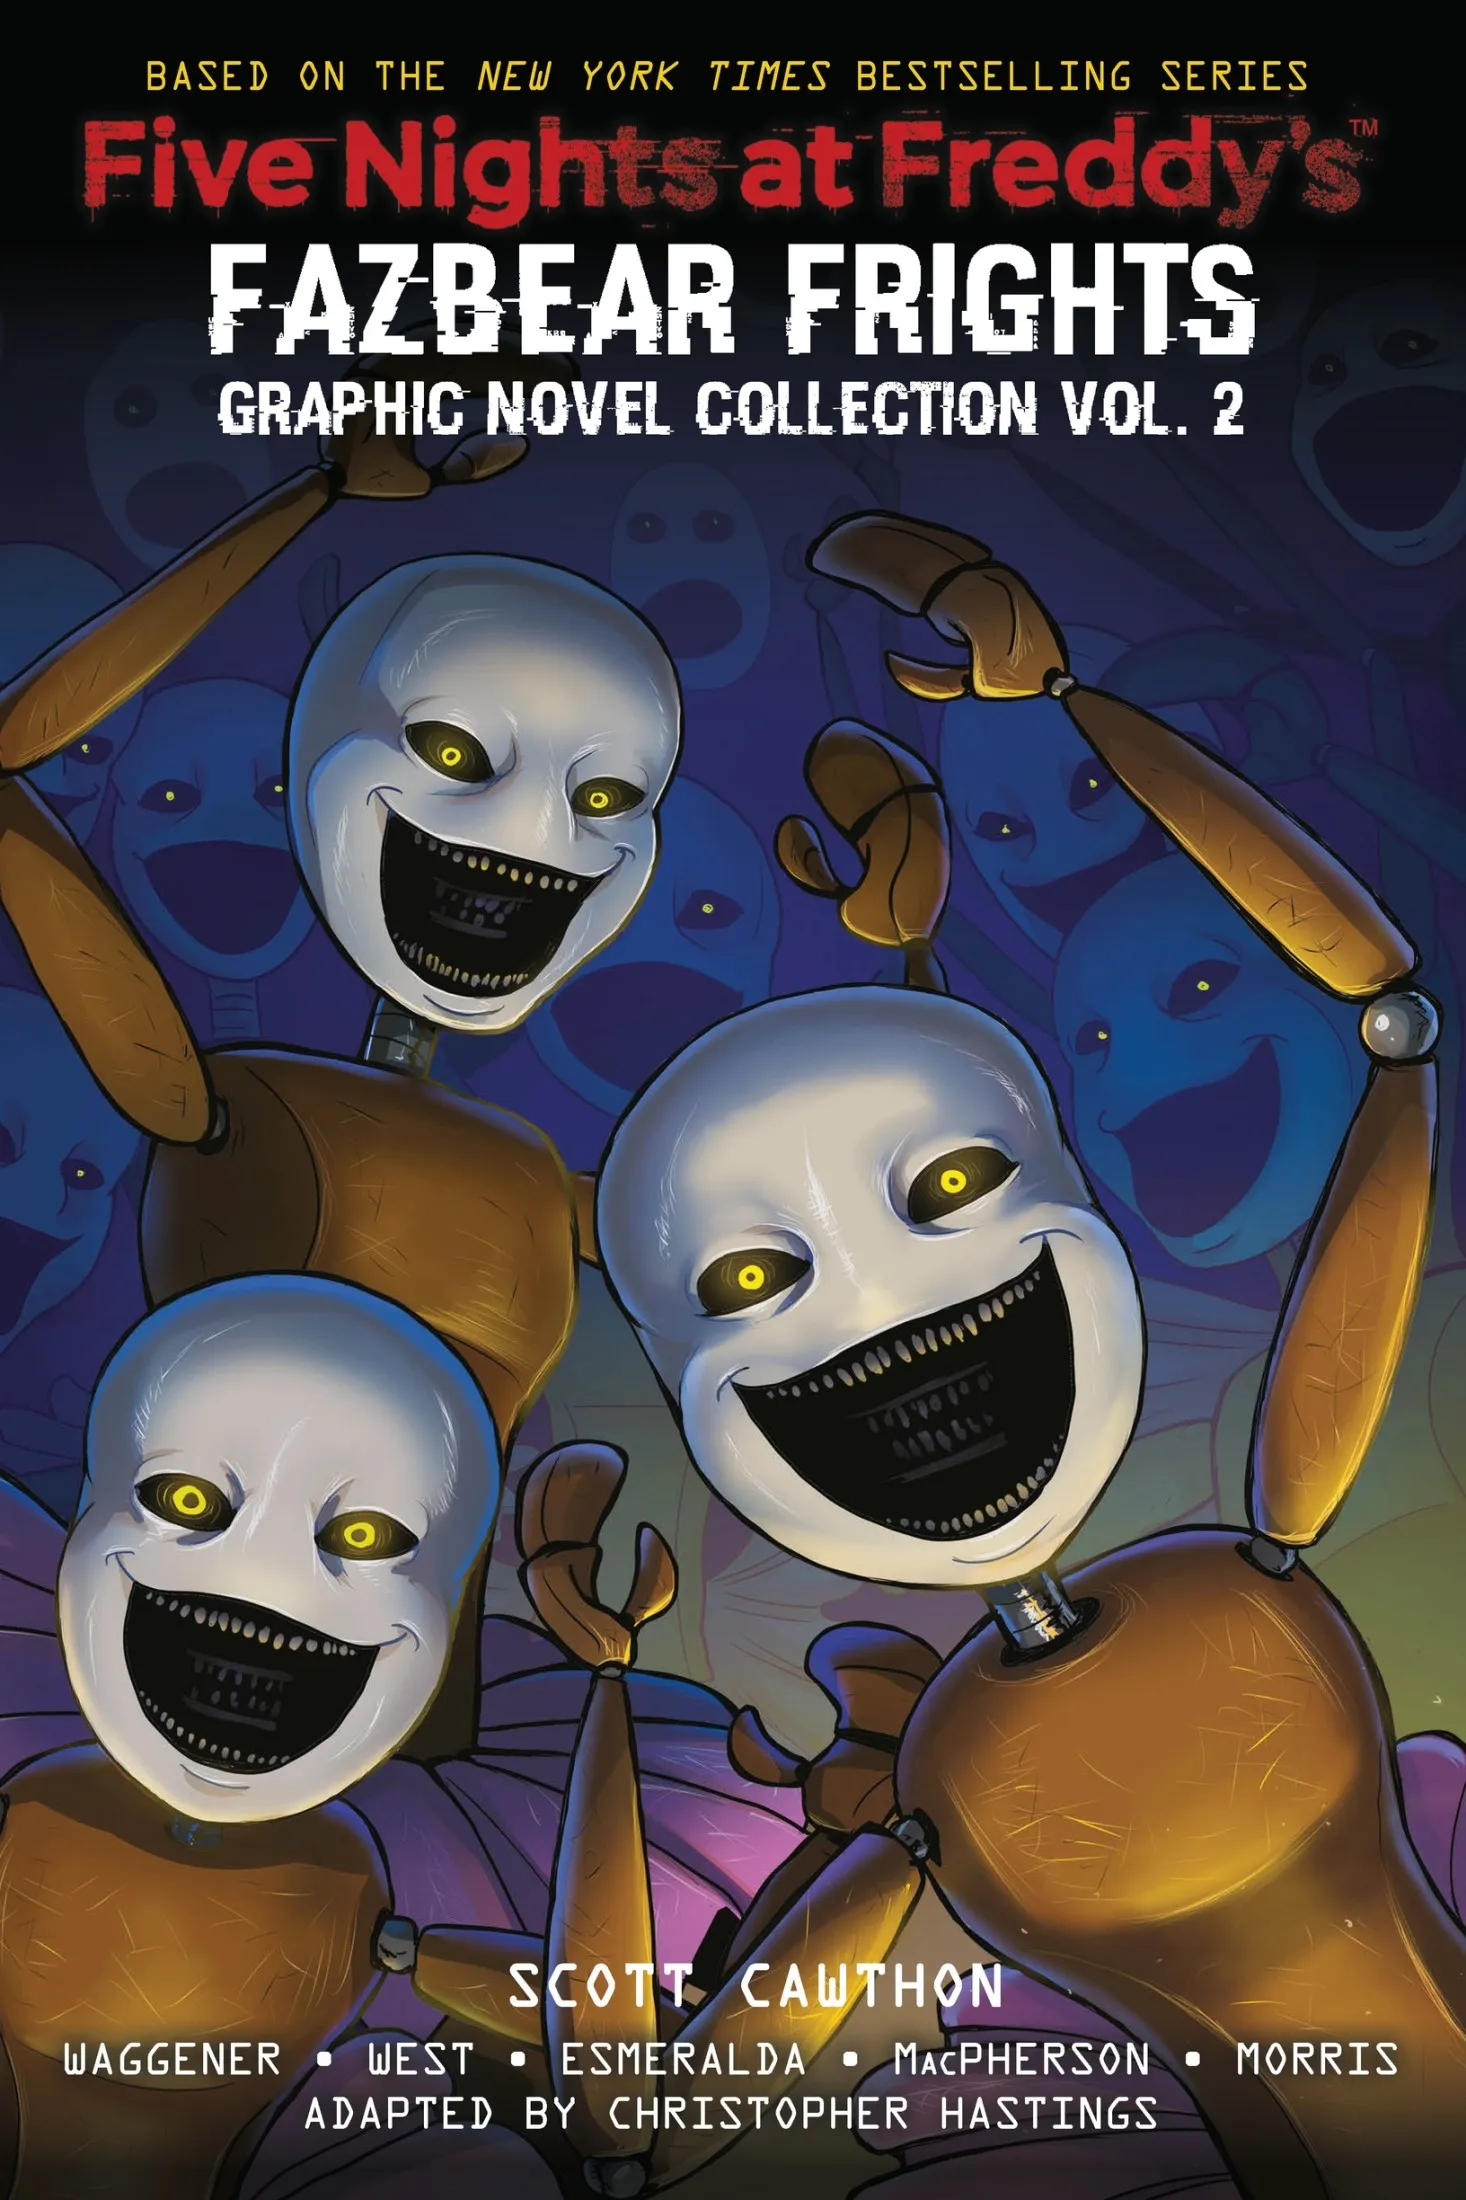 Fazbear Frights Graphic Novel Collection Vol. 2 (Five Nights at Freddy's Graphic Novel #5)